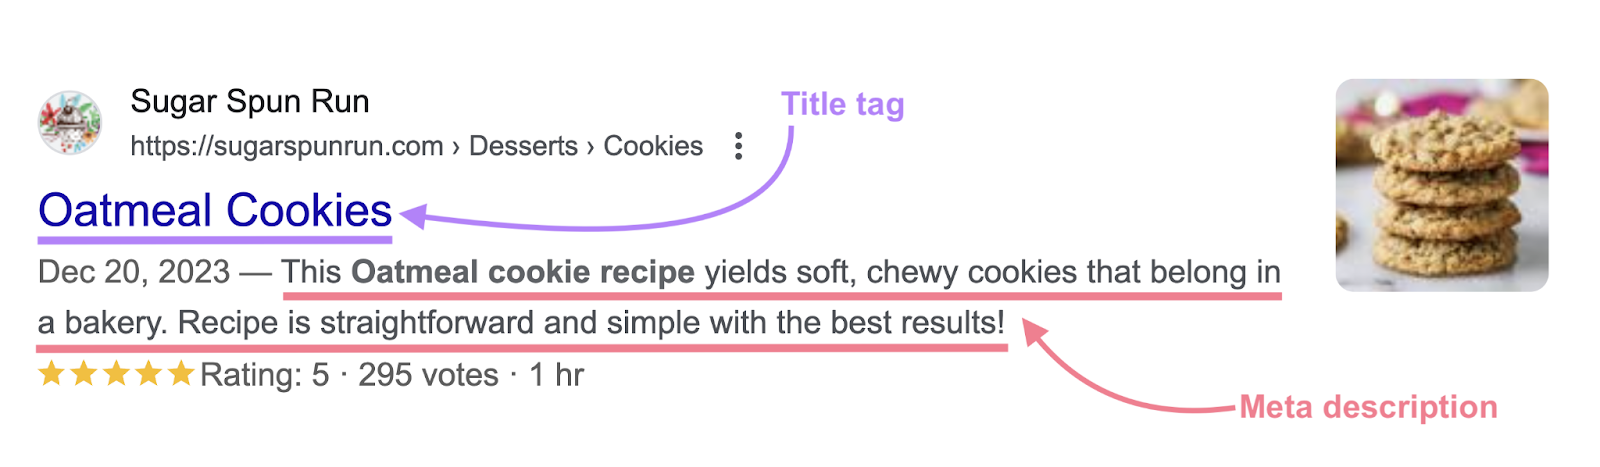 Title tag is Oatmeal Cookies and the meta statement  is "This oatmeal cooky  look    yields soft, chew cookies that beryllium   successful  a bakery..."